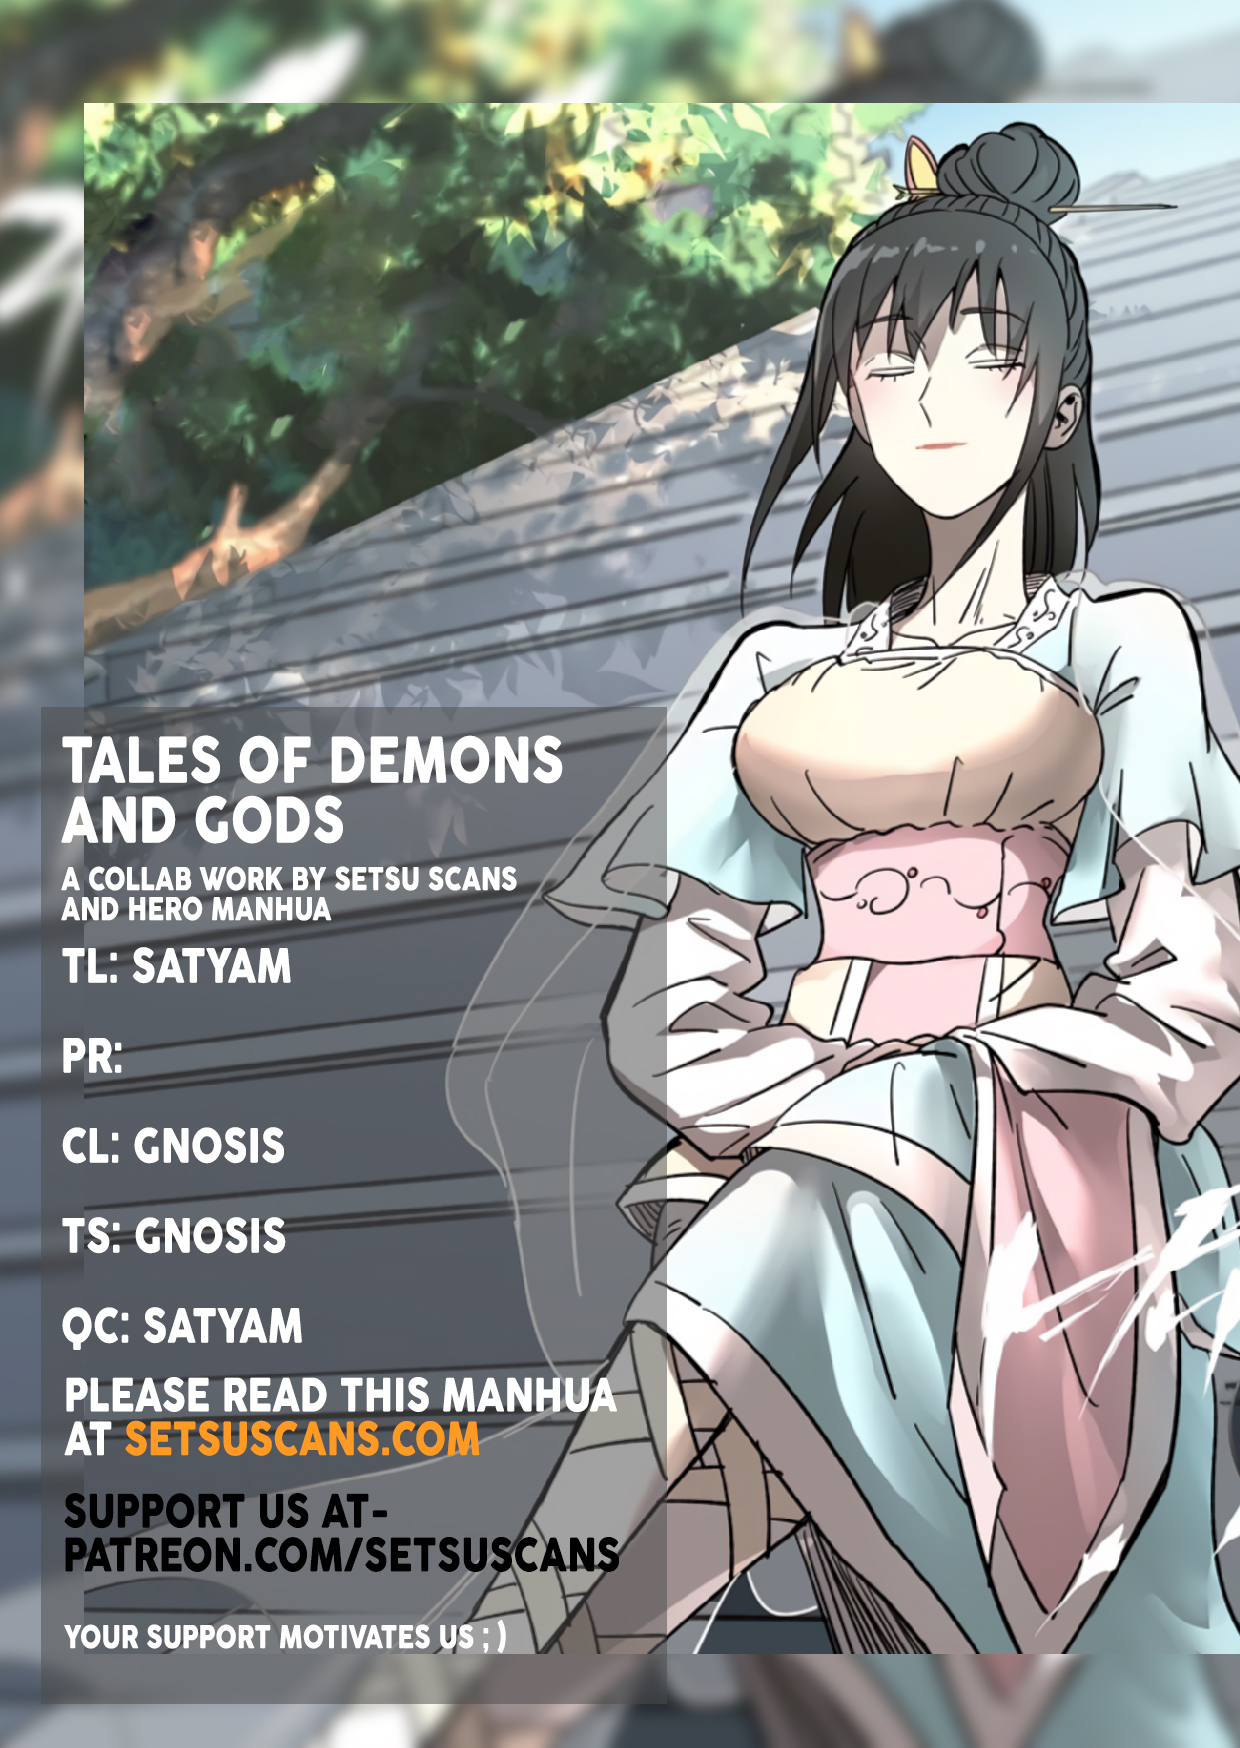 Tales of Demons and Gods - Chapter 14577 - Caught up again by Xiao Yu (1) - Image 1